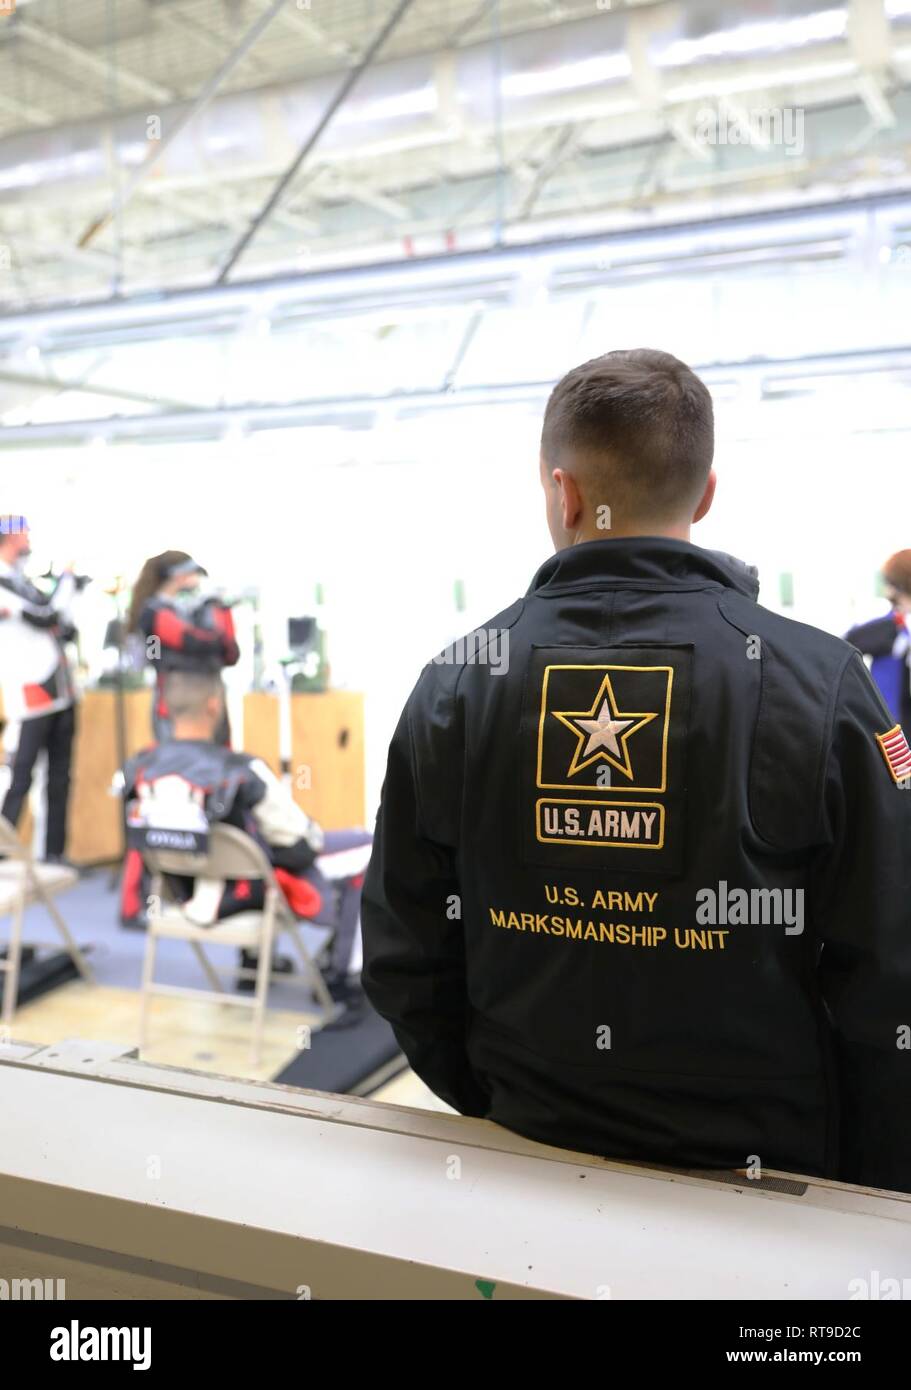 U.S. Army Pfc. Jared Desrosiers, a Swansea, Massachusetts native who serves on the U.S. Army Marksmanship Unit’s International Rifle Team, watches over competitors at the U.S. Army Junior Rifle National Championships at Fort Benning, Georgia January 26, 2019. The three-day, invitation-only event had the youth athletes compete side by side for top individual and team honors in three-position smallbore, sporter rifle and precision rifle. Stock Photo